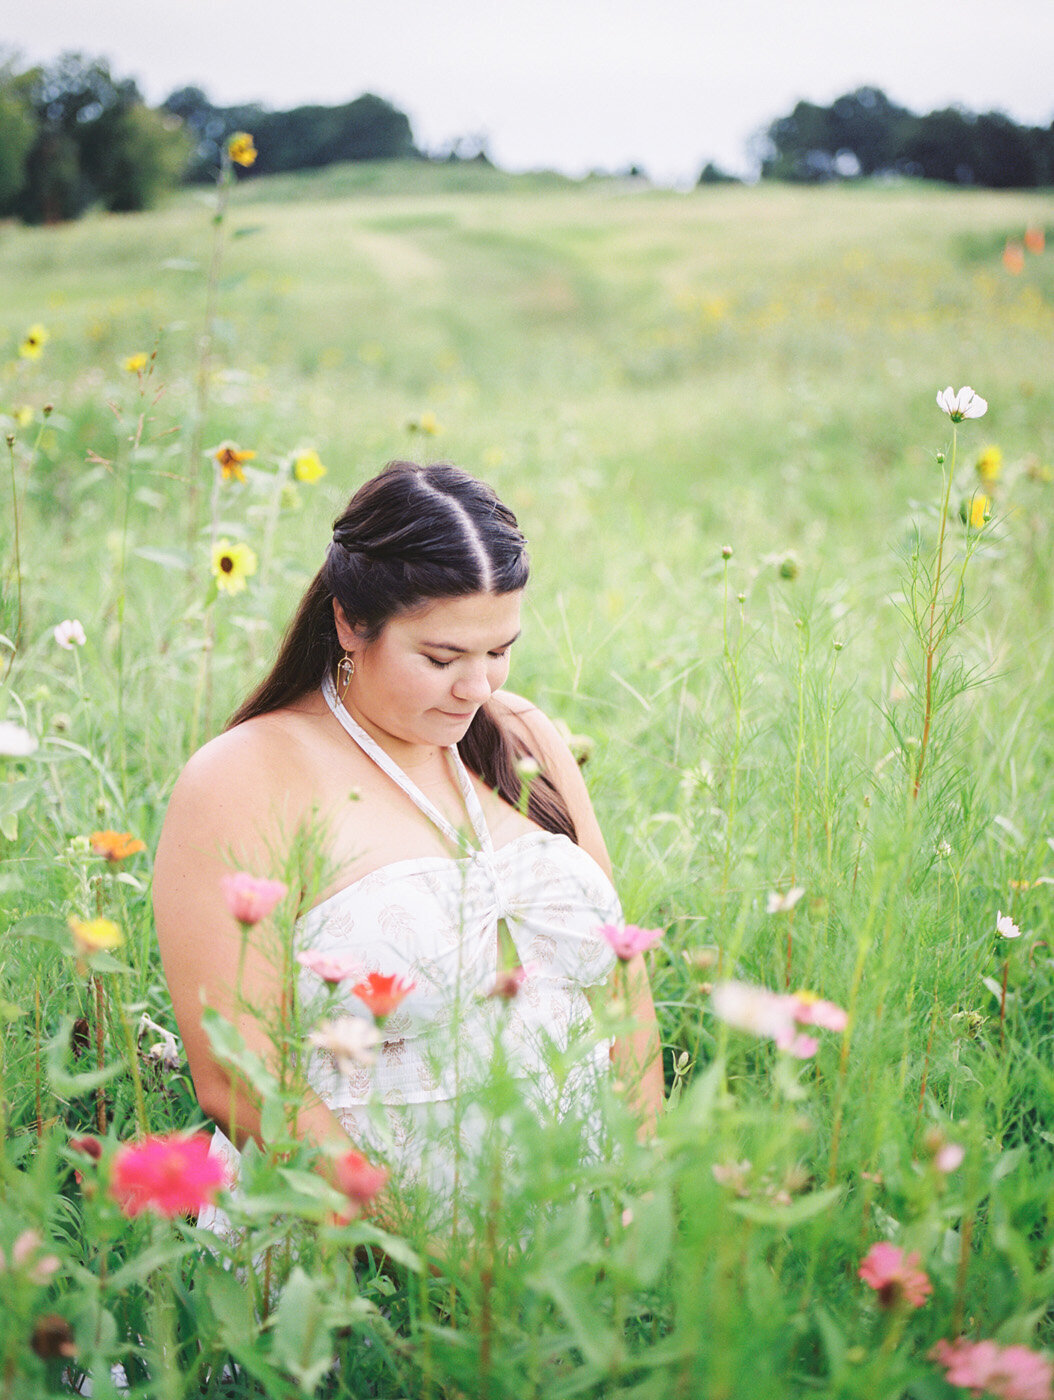 Raleigh Maternity Photographer | Jessica Agee Photography - 016